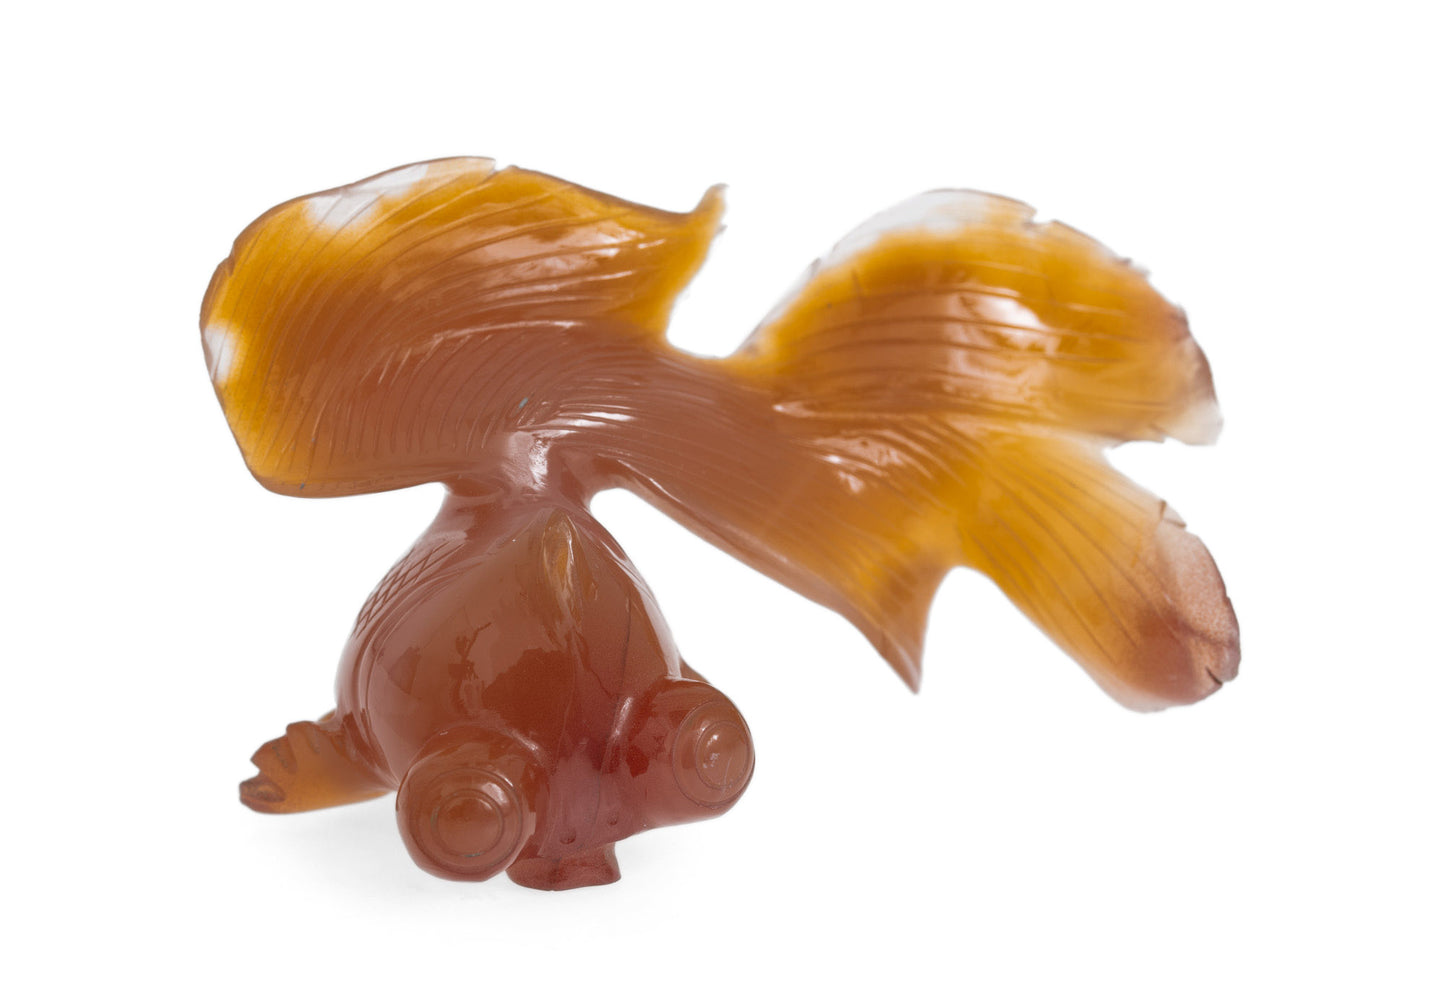 Vintage Chinese Carved Carnelian Model of a Shubunkin Goldfish with Stand (Code 2804)